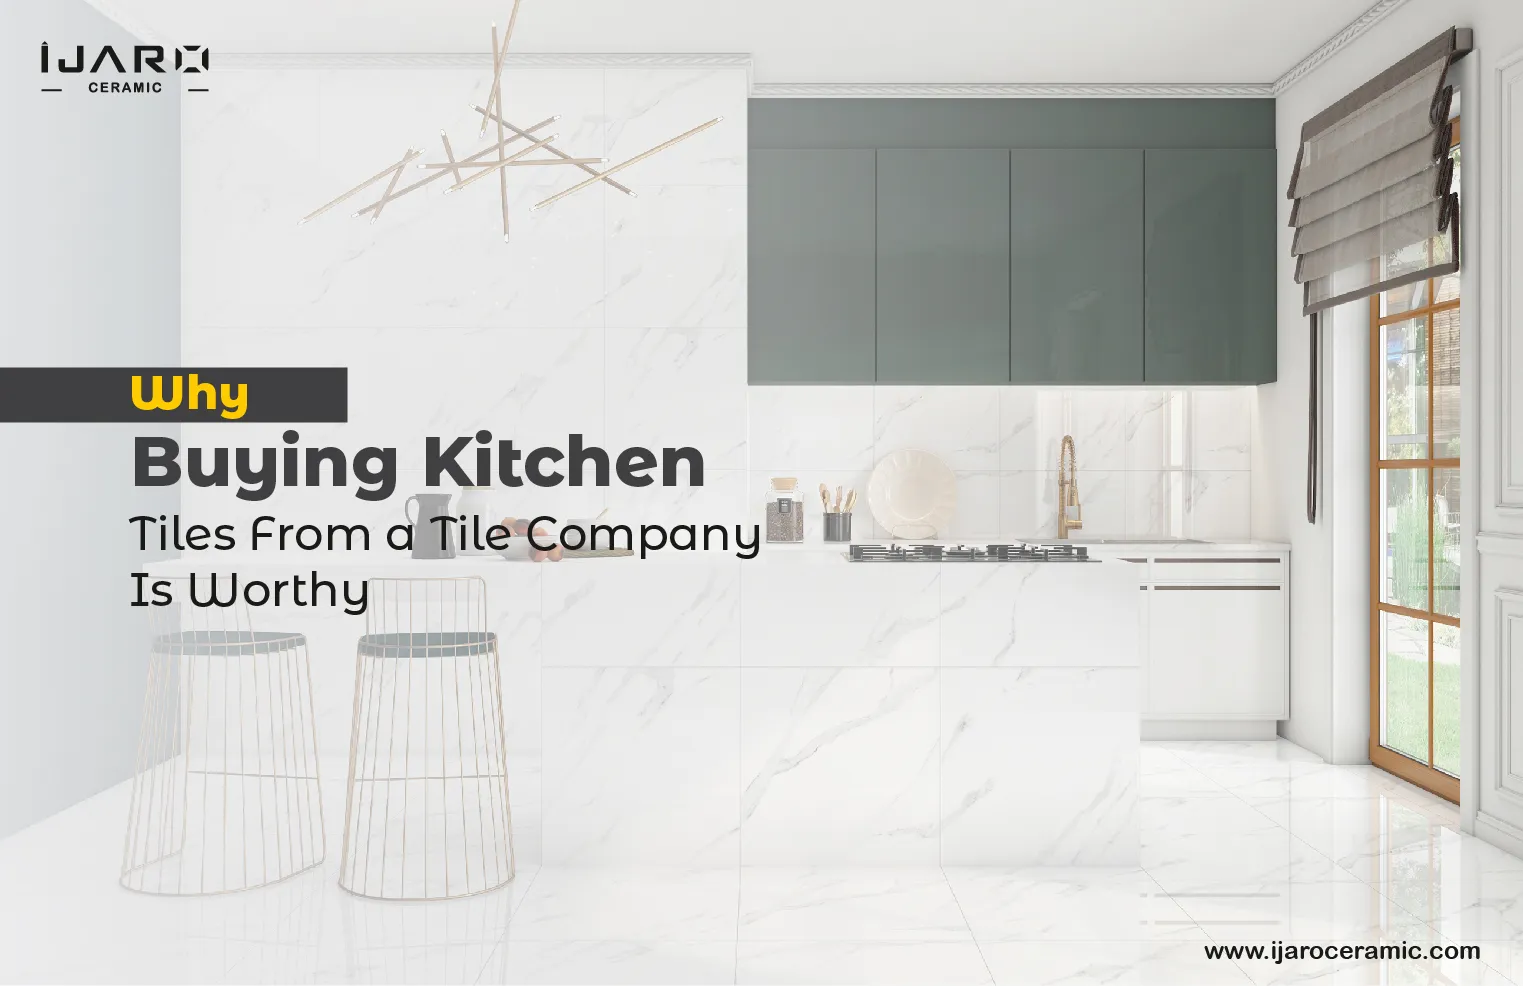 Why Buying Kitchen Tiles From a Tile Company Is Worthy?